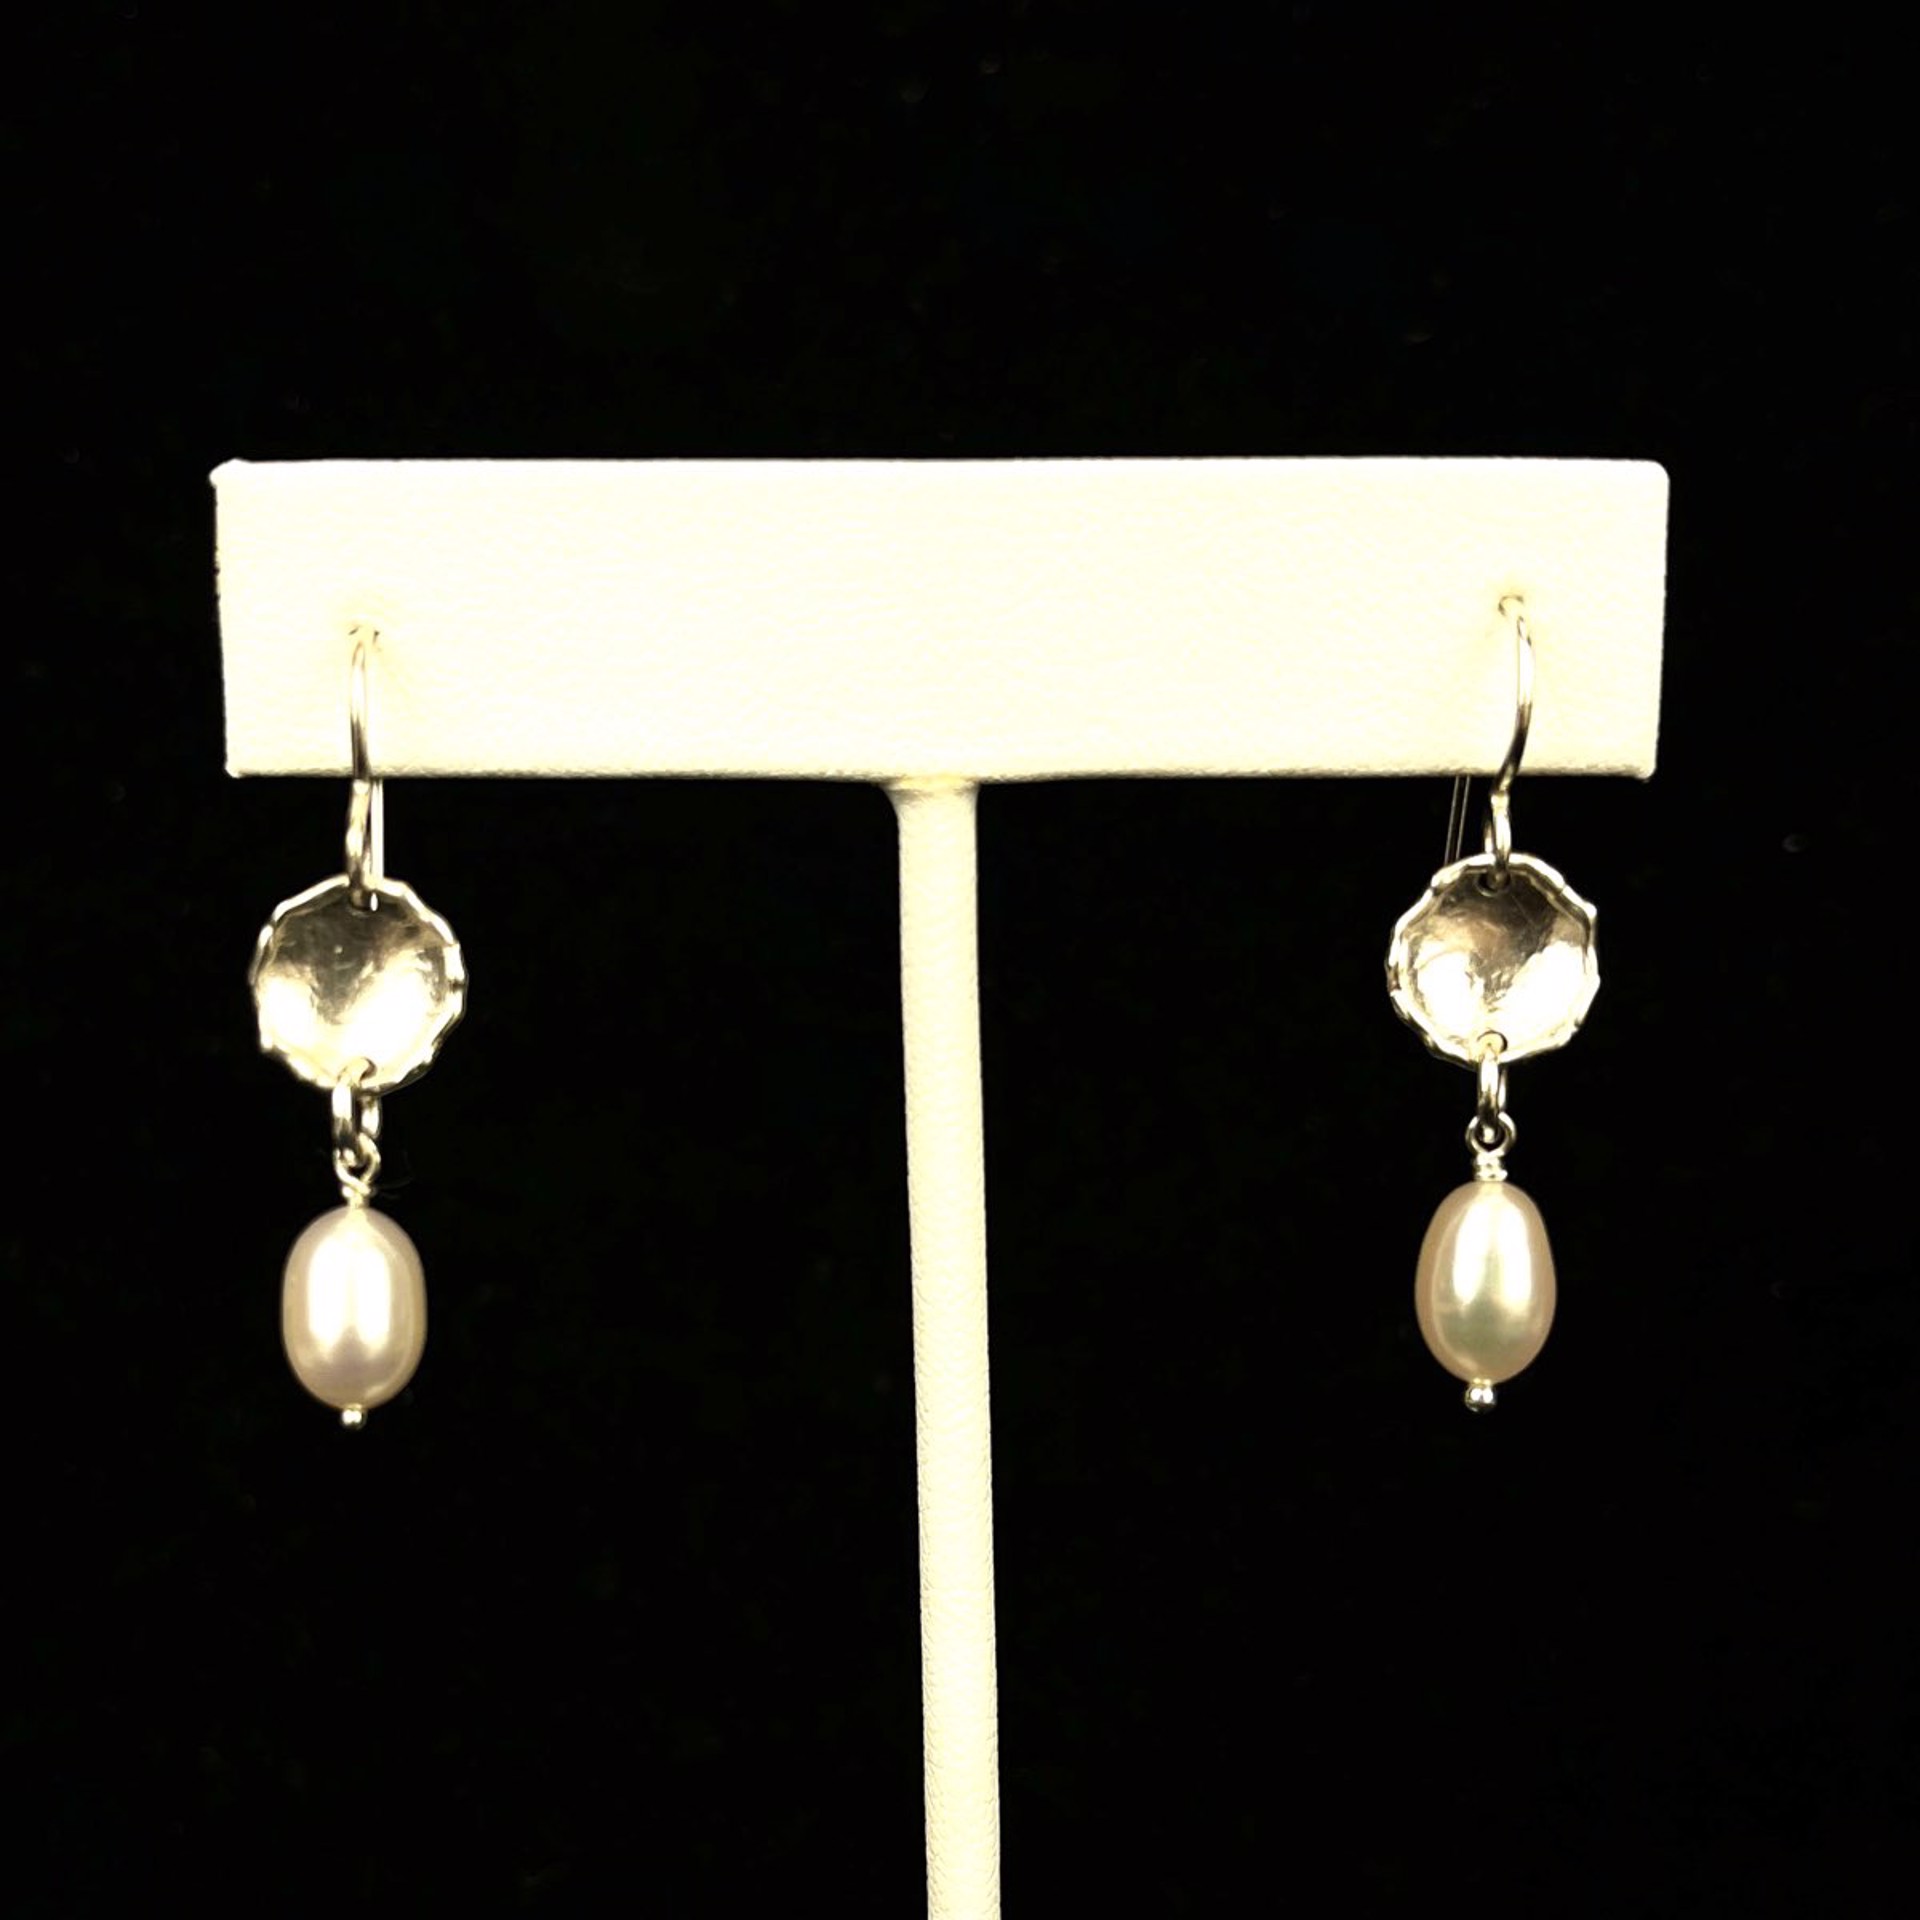 Melted Edge Disc with White Pearl Sterling Earrings by Nichole Collins